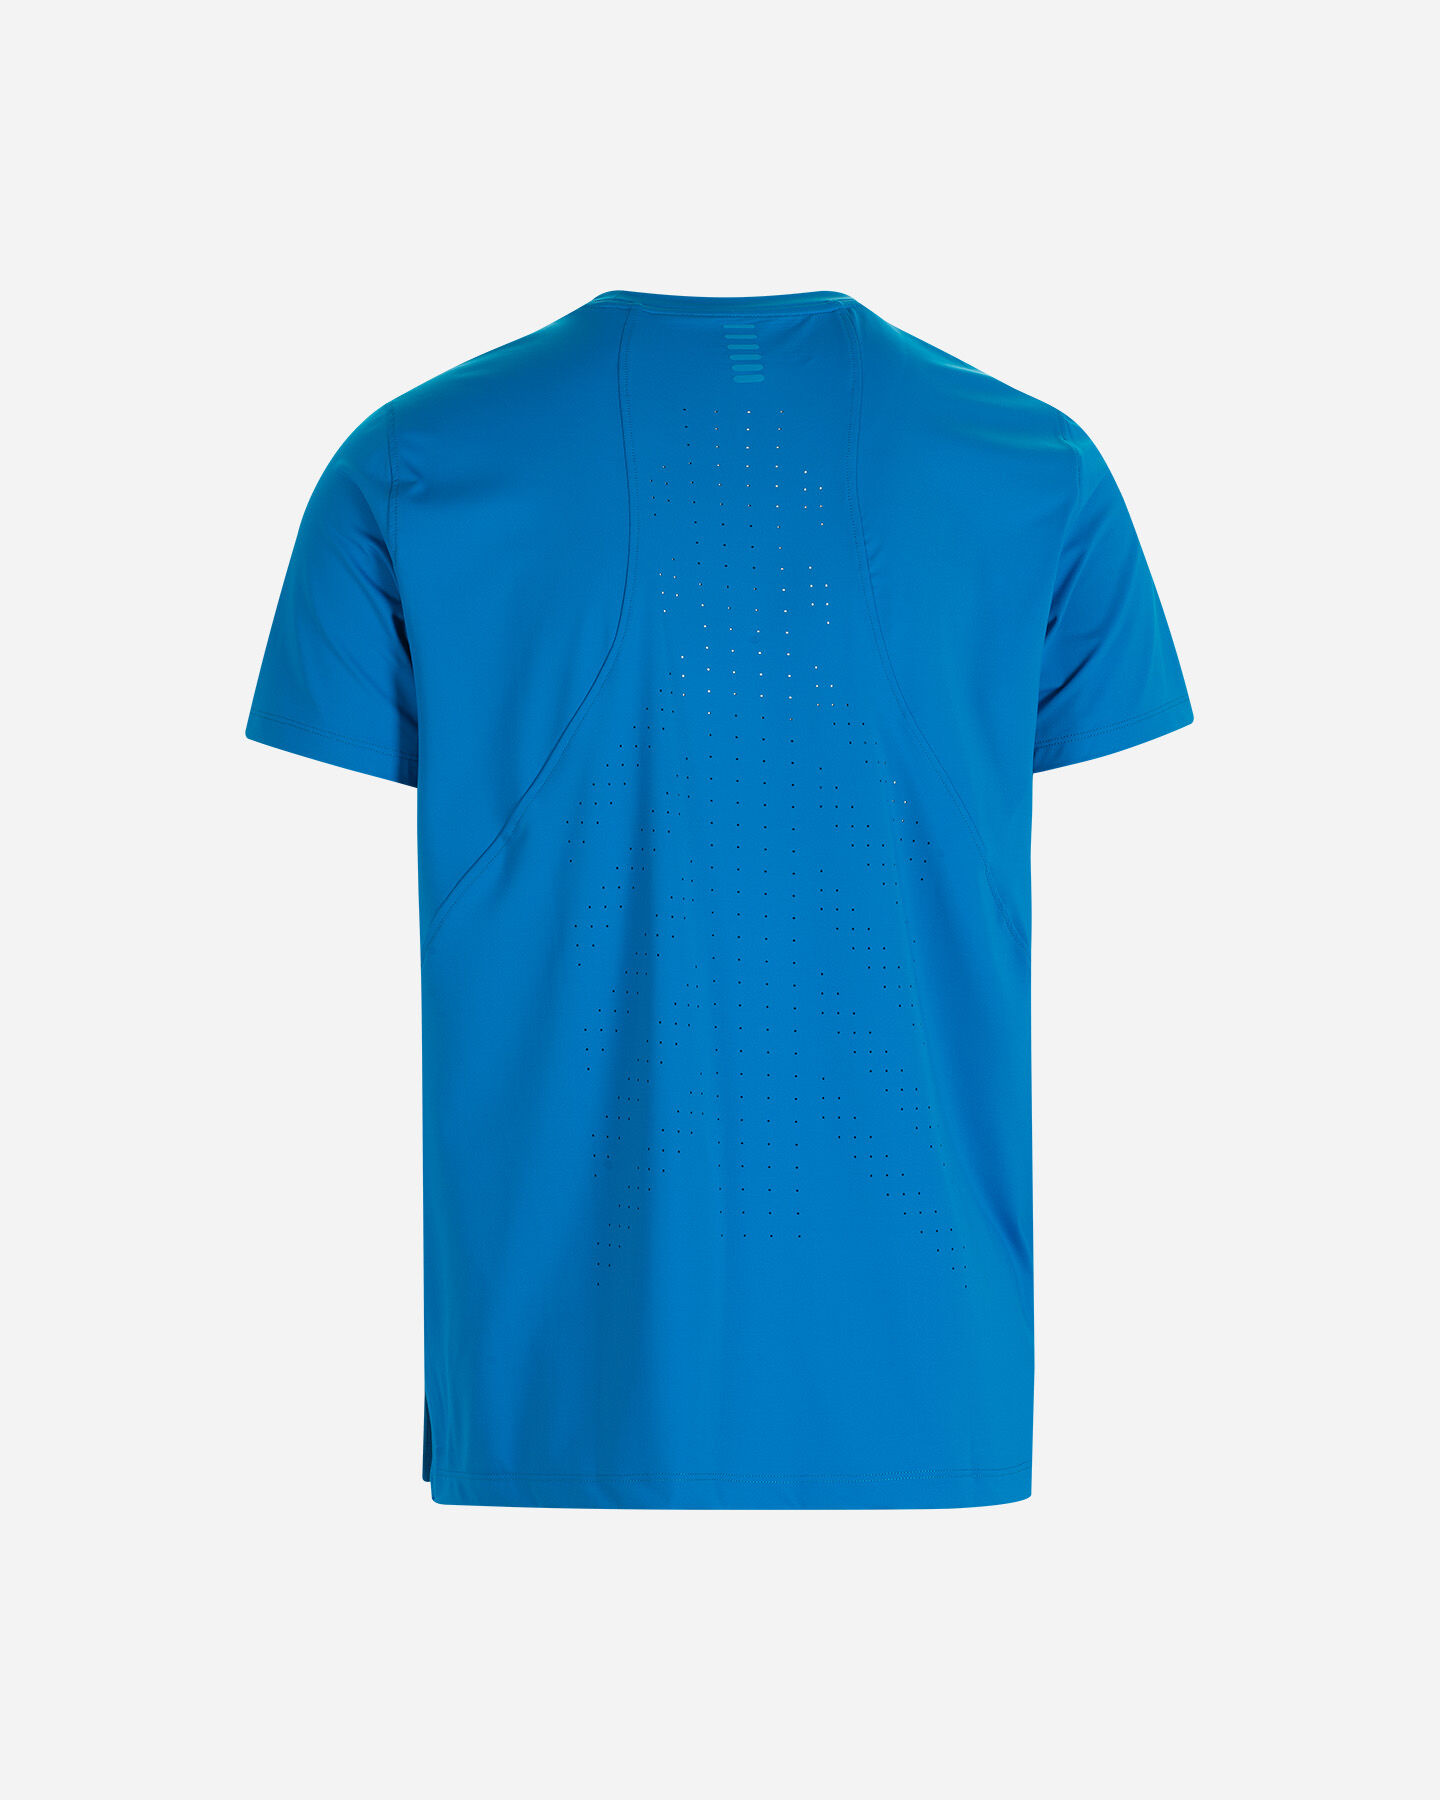  T-Shirt running UNDER ARMOUR ISOCHILL M S5390454|0899|SM scatto 1